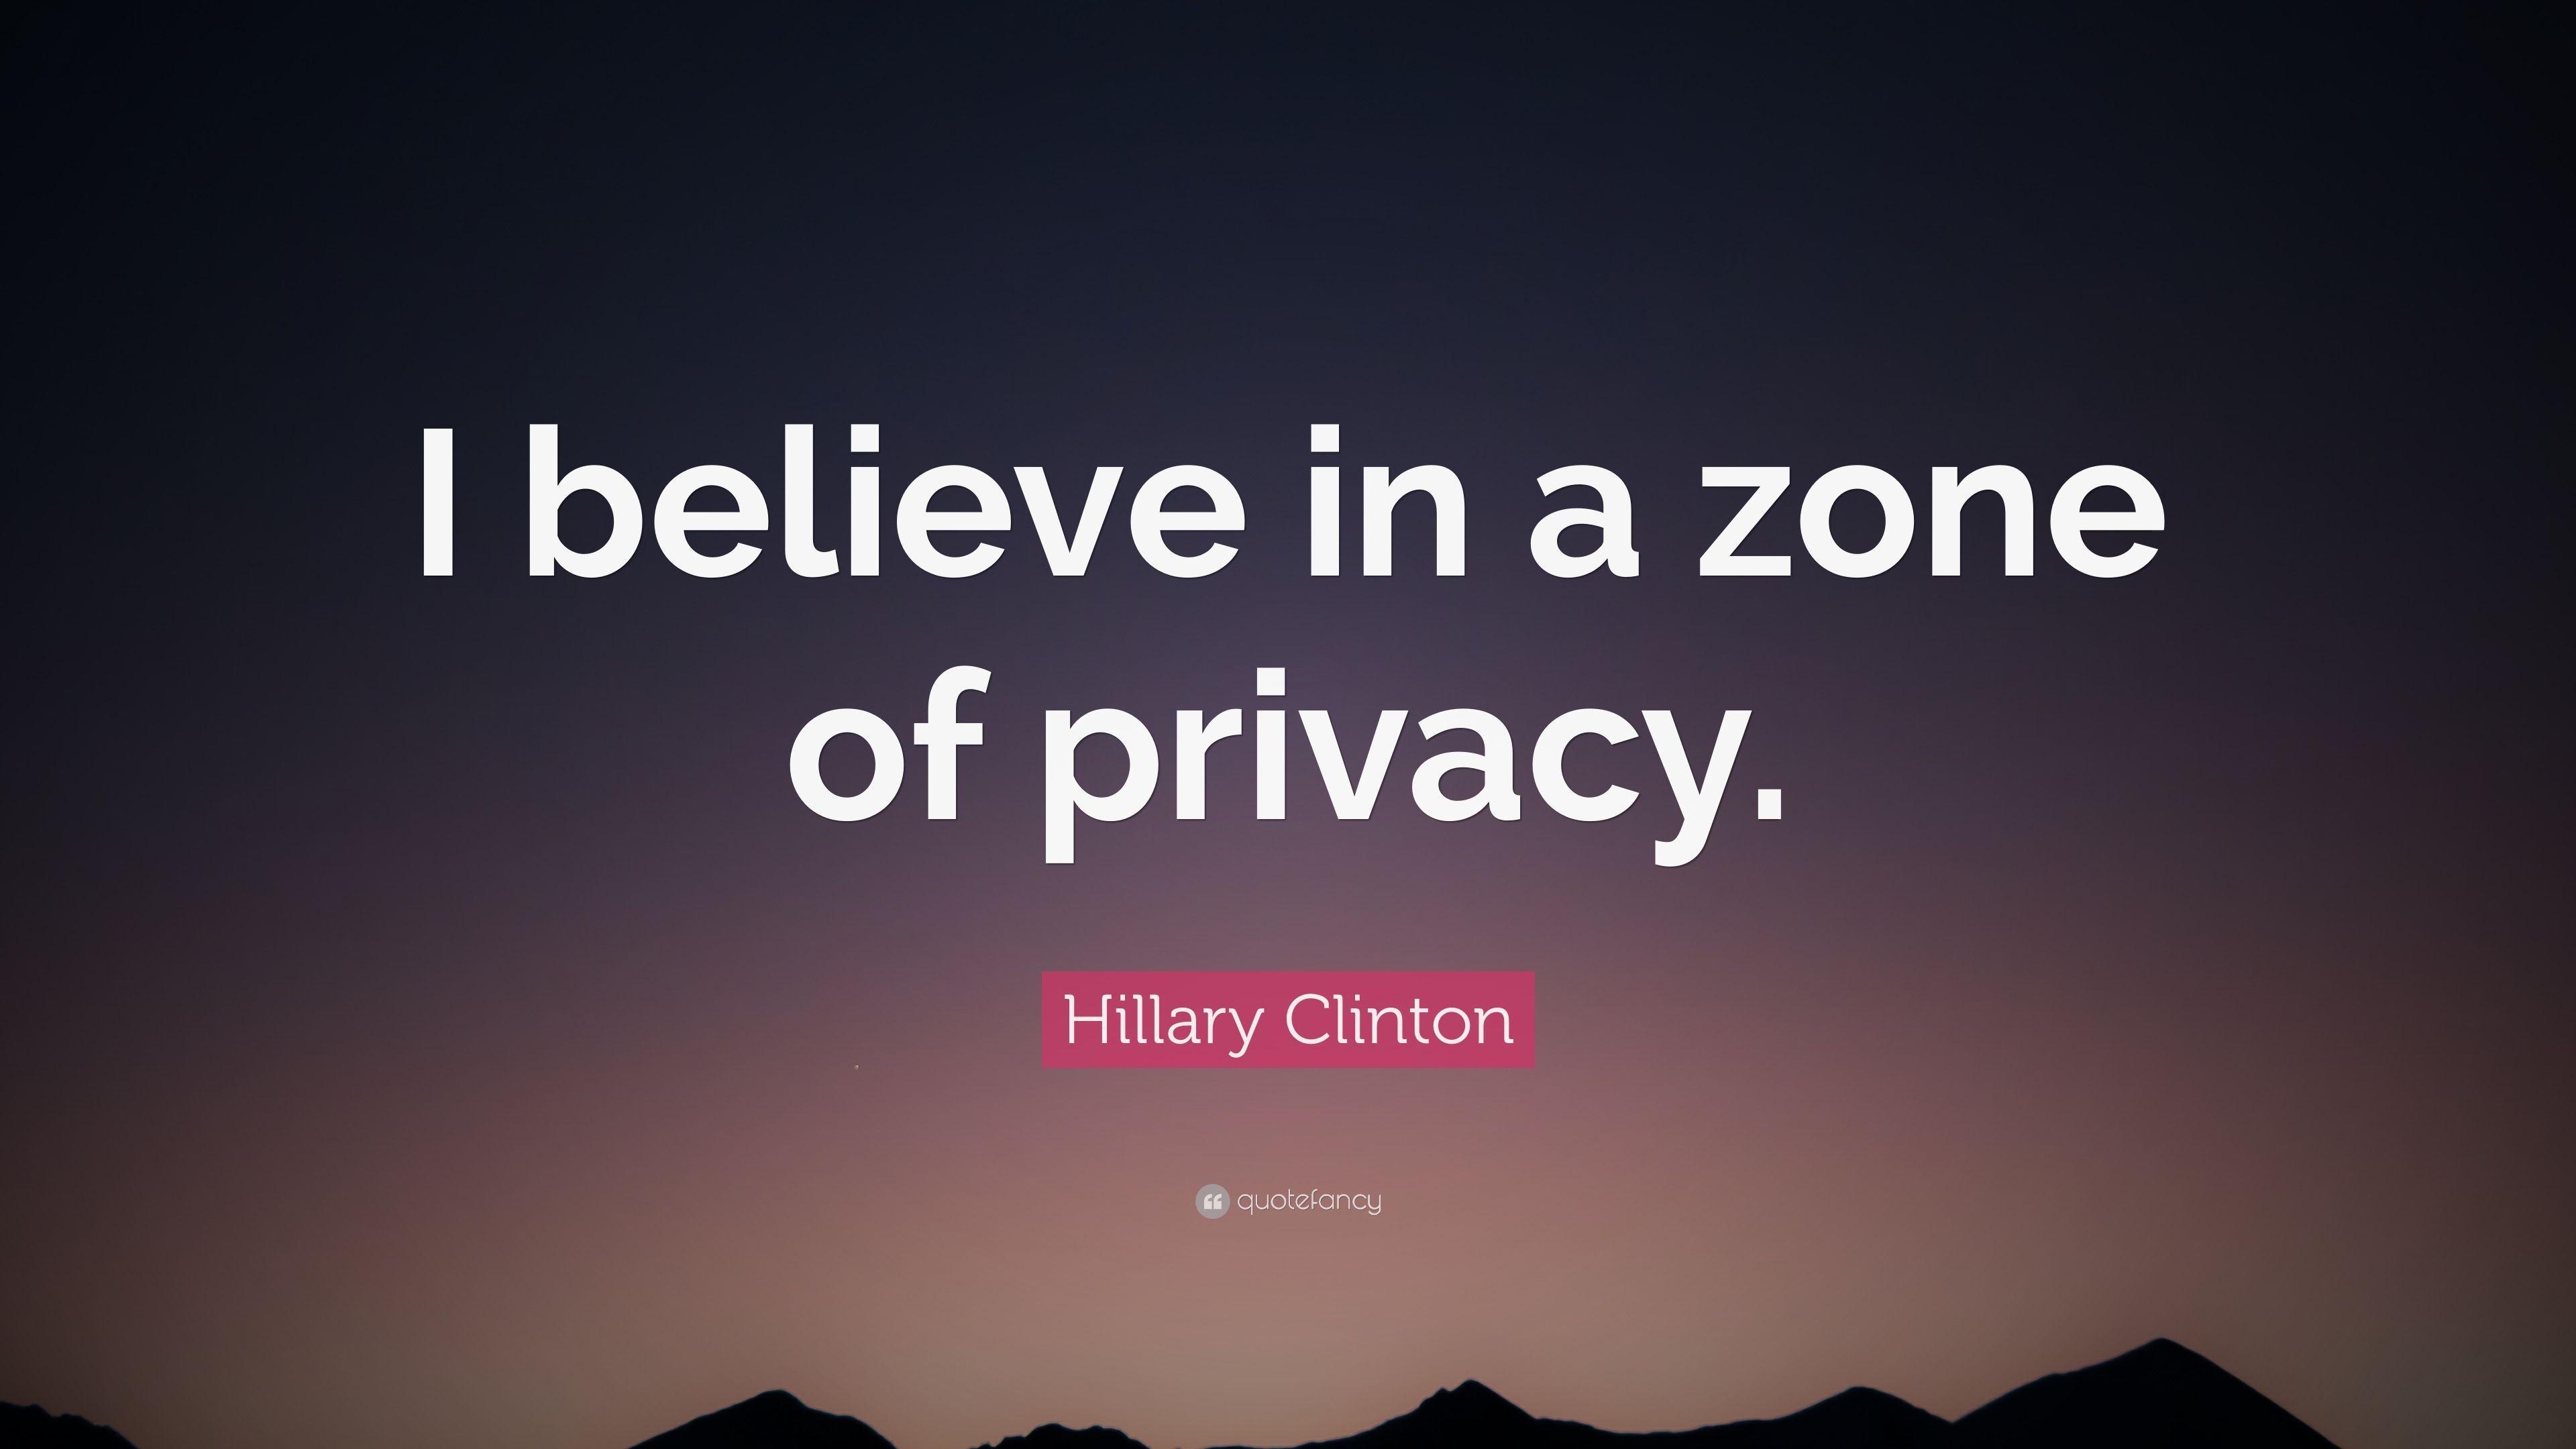 Hillary Clinton Quote: “I believe in a zone of privacy.” 9